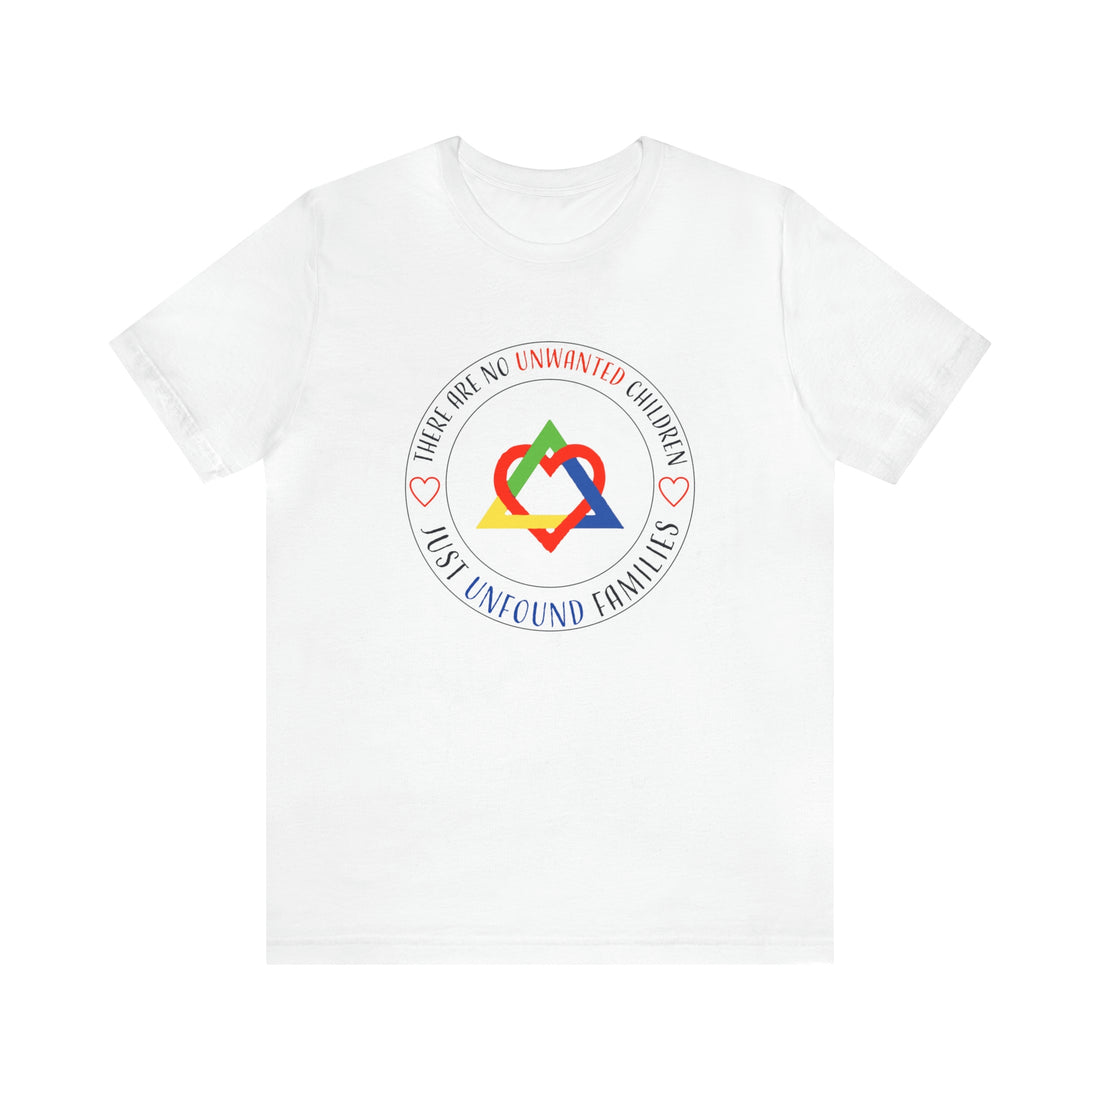 There are No Unwanted Children Only Unfound Families - Unisex Adult T-Shirt